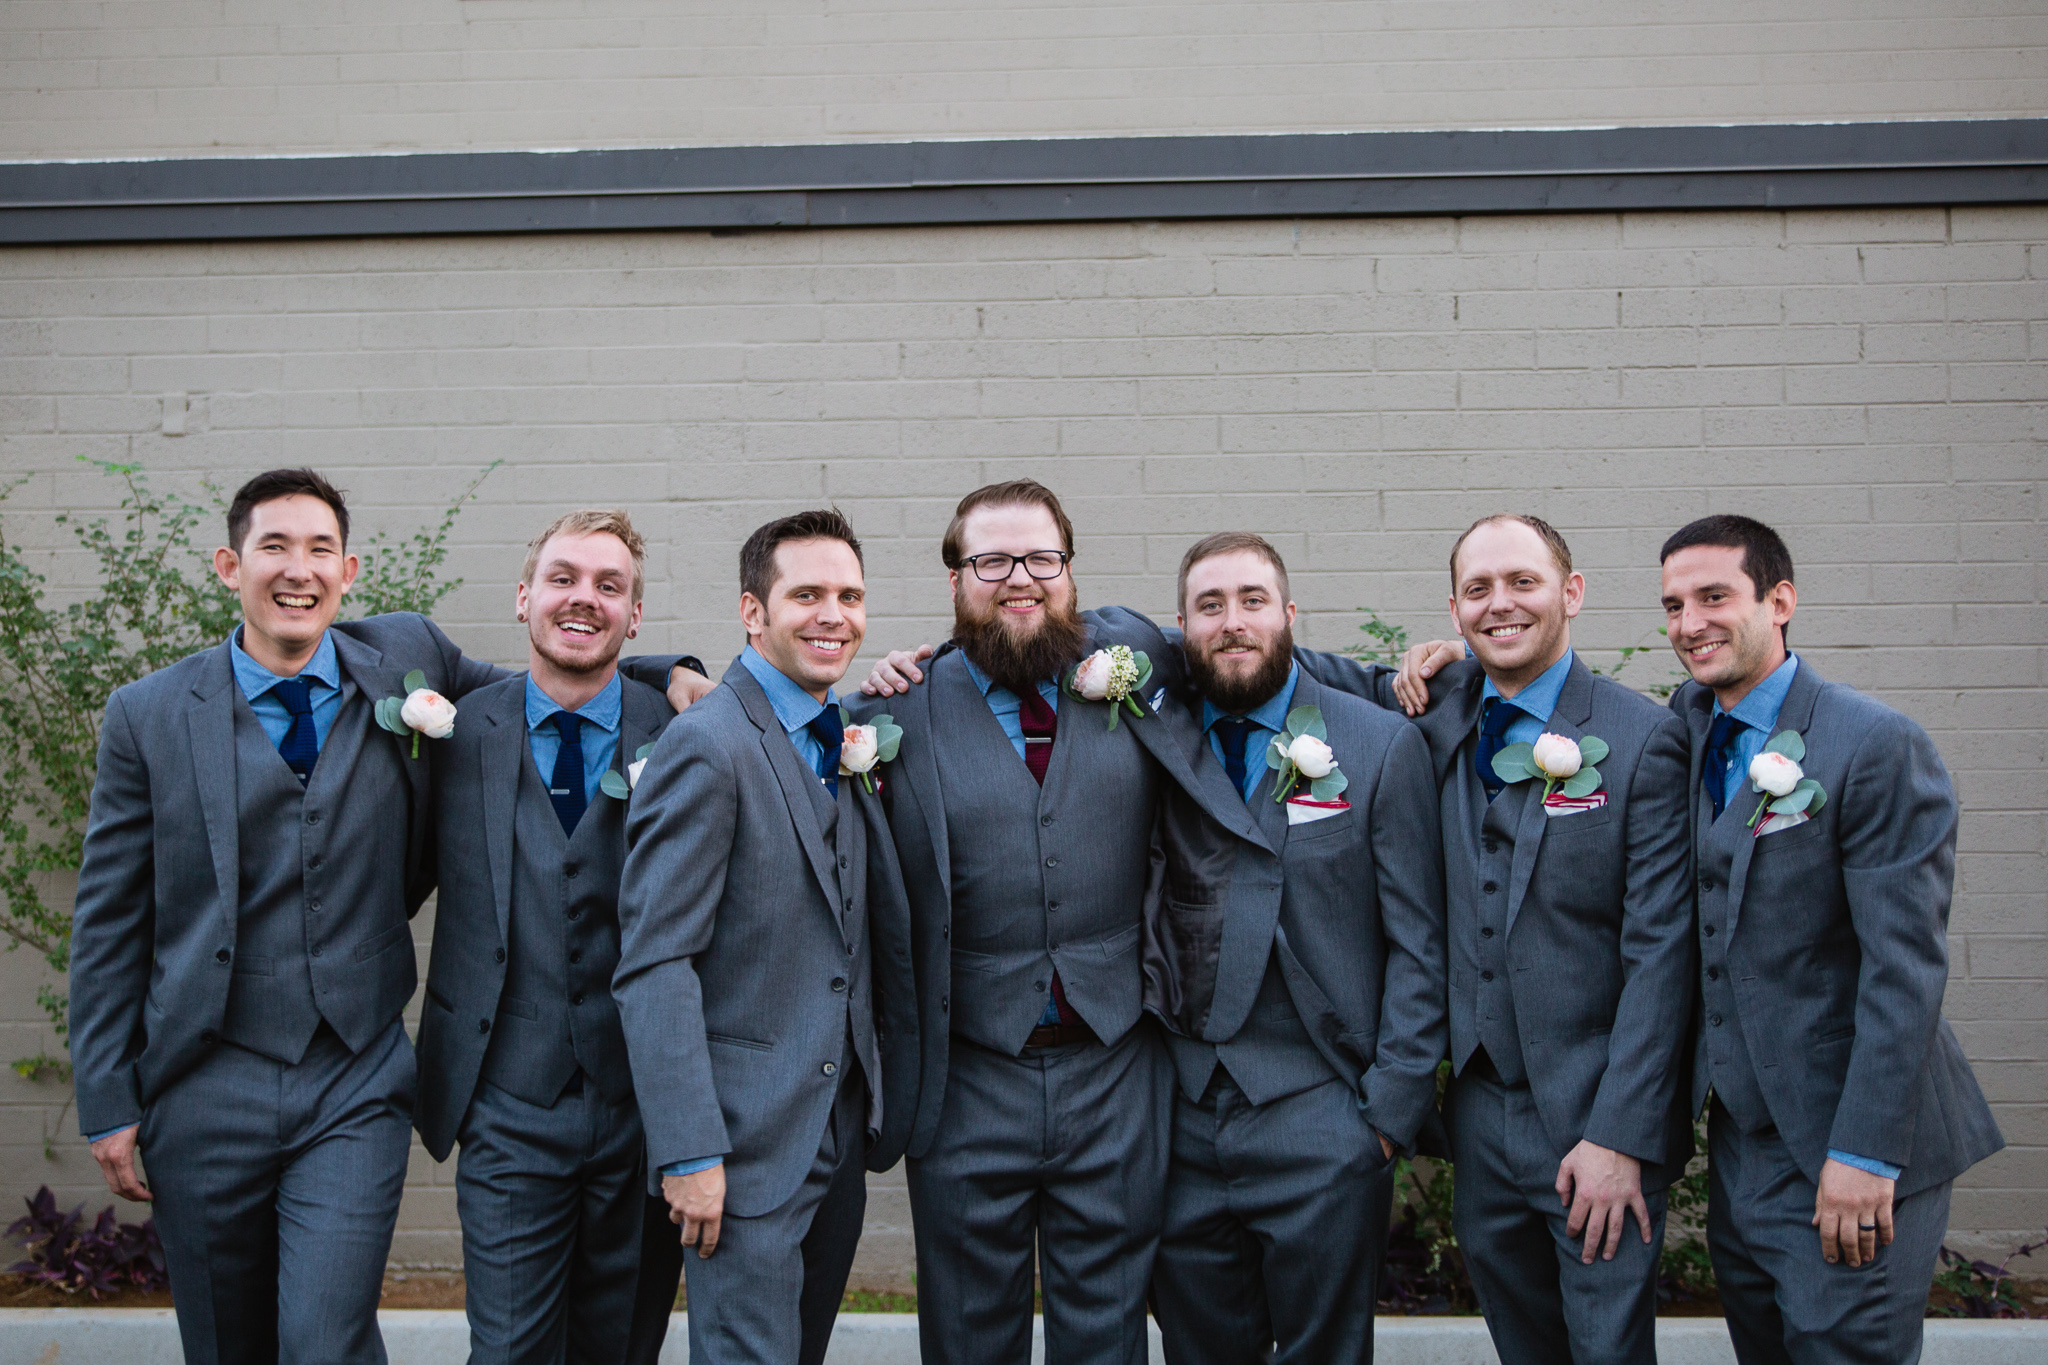 Grey blue and maroon themed groomsmen at a vintage book themed wedding day.